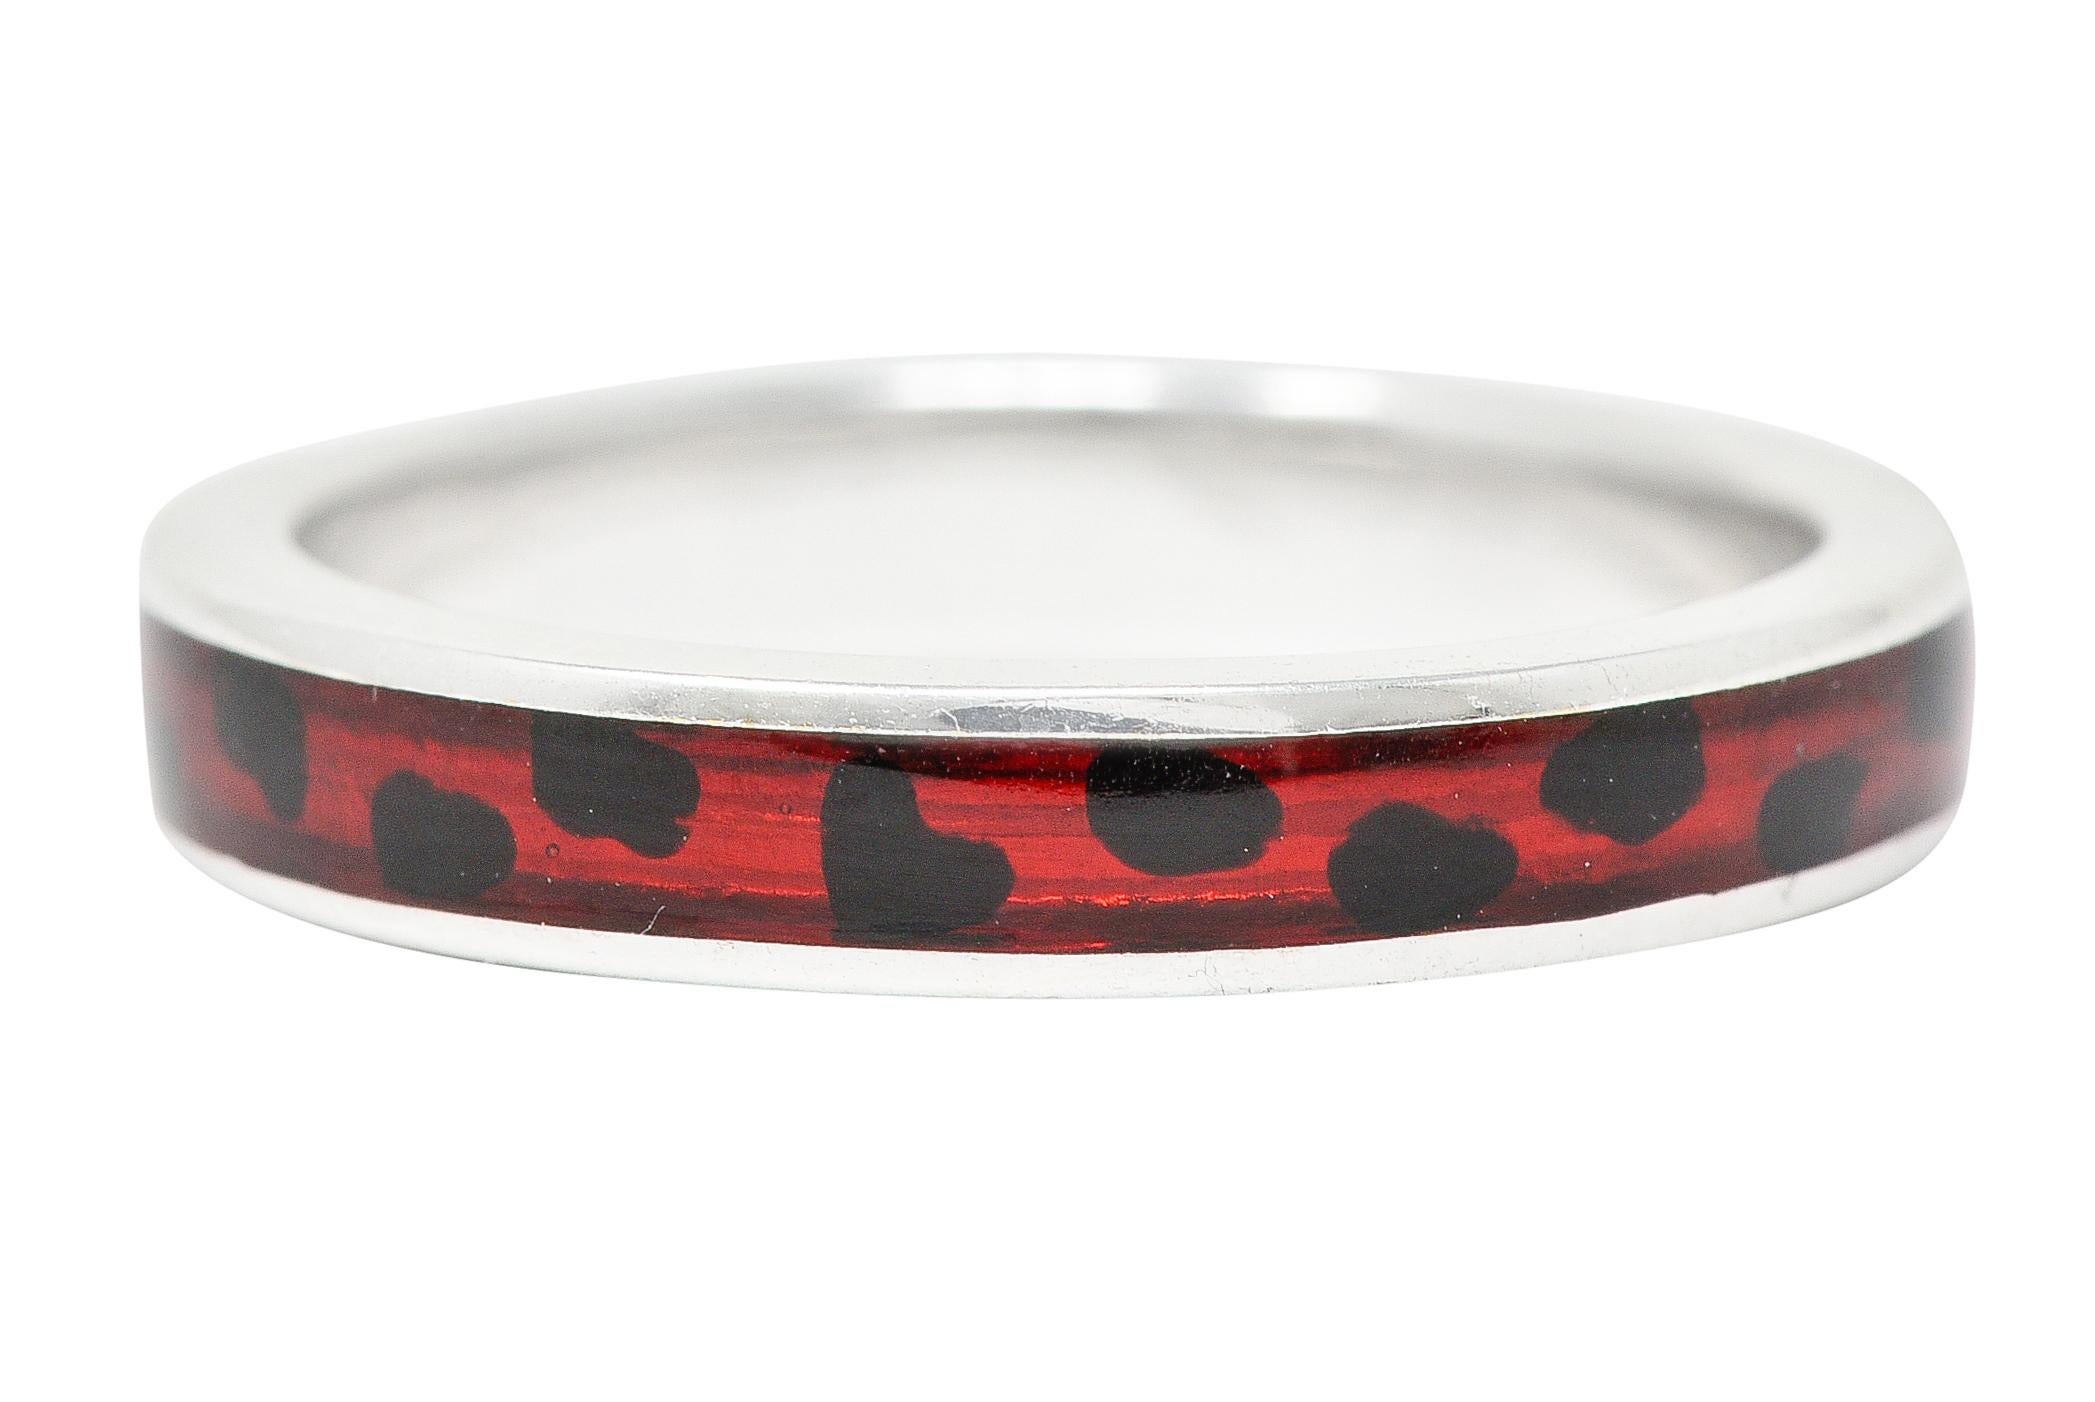 Band ring features a recessed guilloche enamel channel fully around. Transparent medium red in color - glossed over engraved linear pattern. With opaque black enamel cheetah style spots. Accented by high polished gold surround. Stamped 18kt for 18